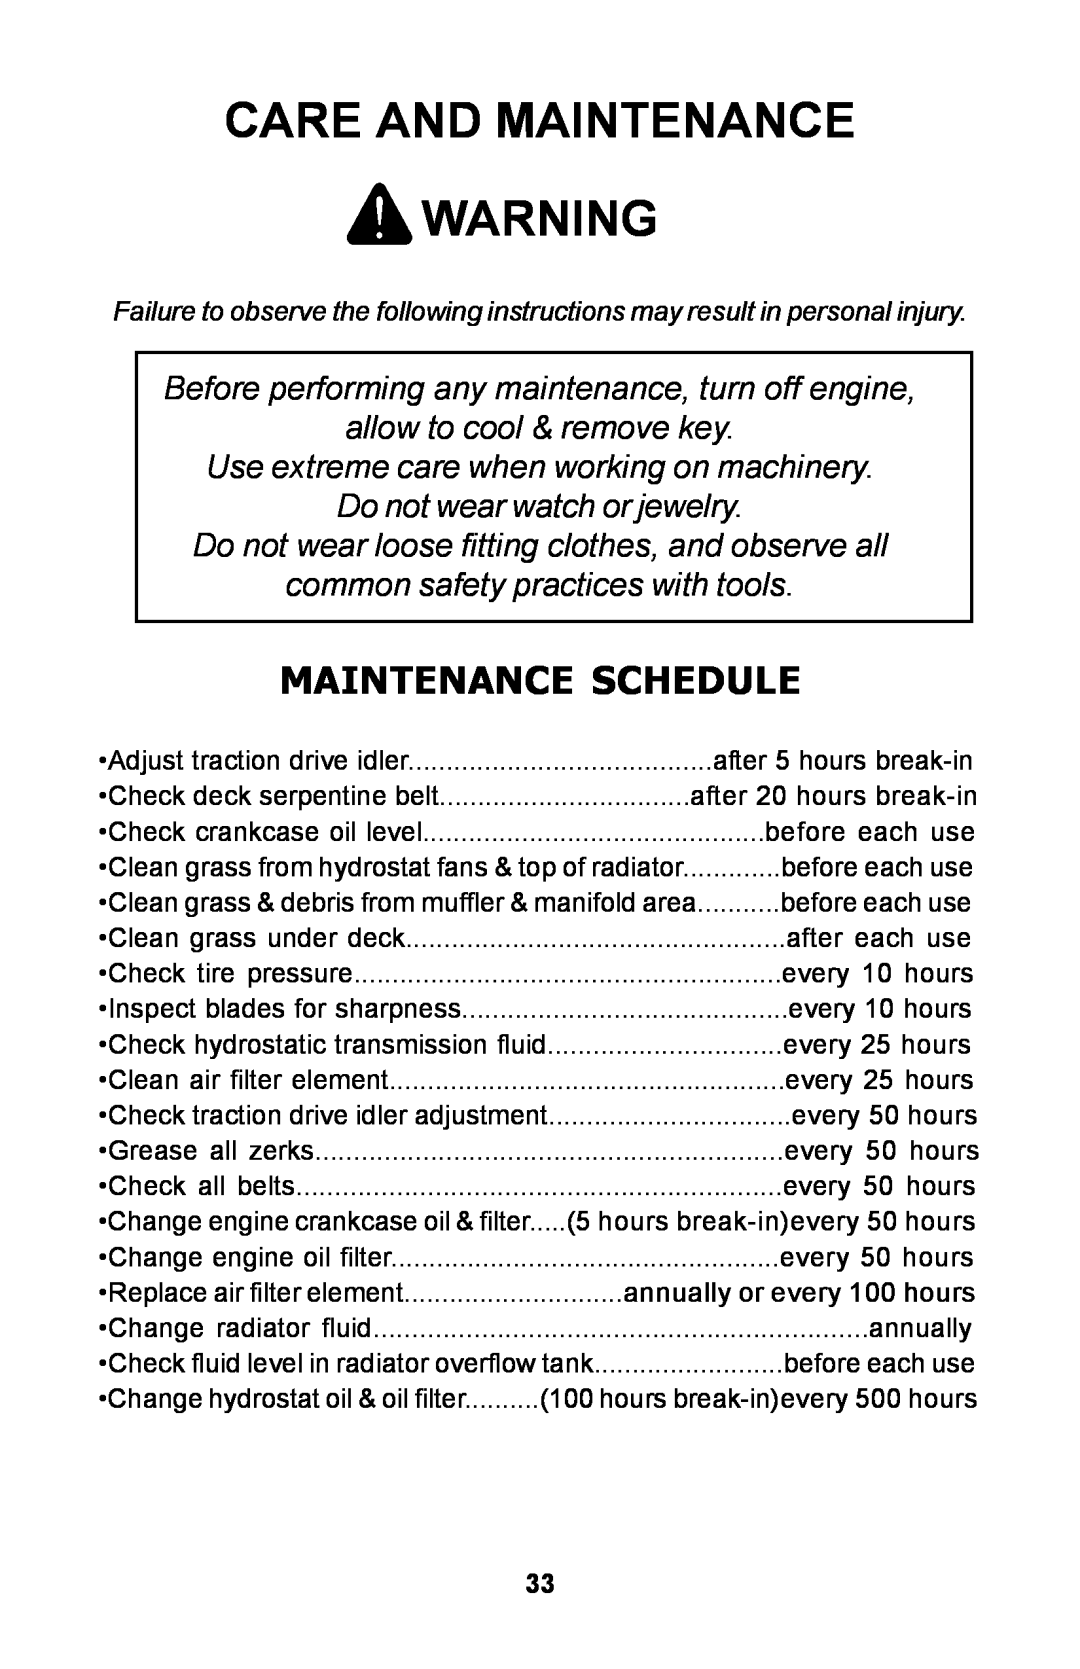 Dixon ZTR manual Care And Maintenance, Maintenance Schedule, Before performing any maintenance, turn off engine 